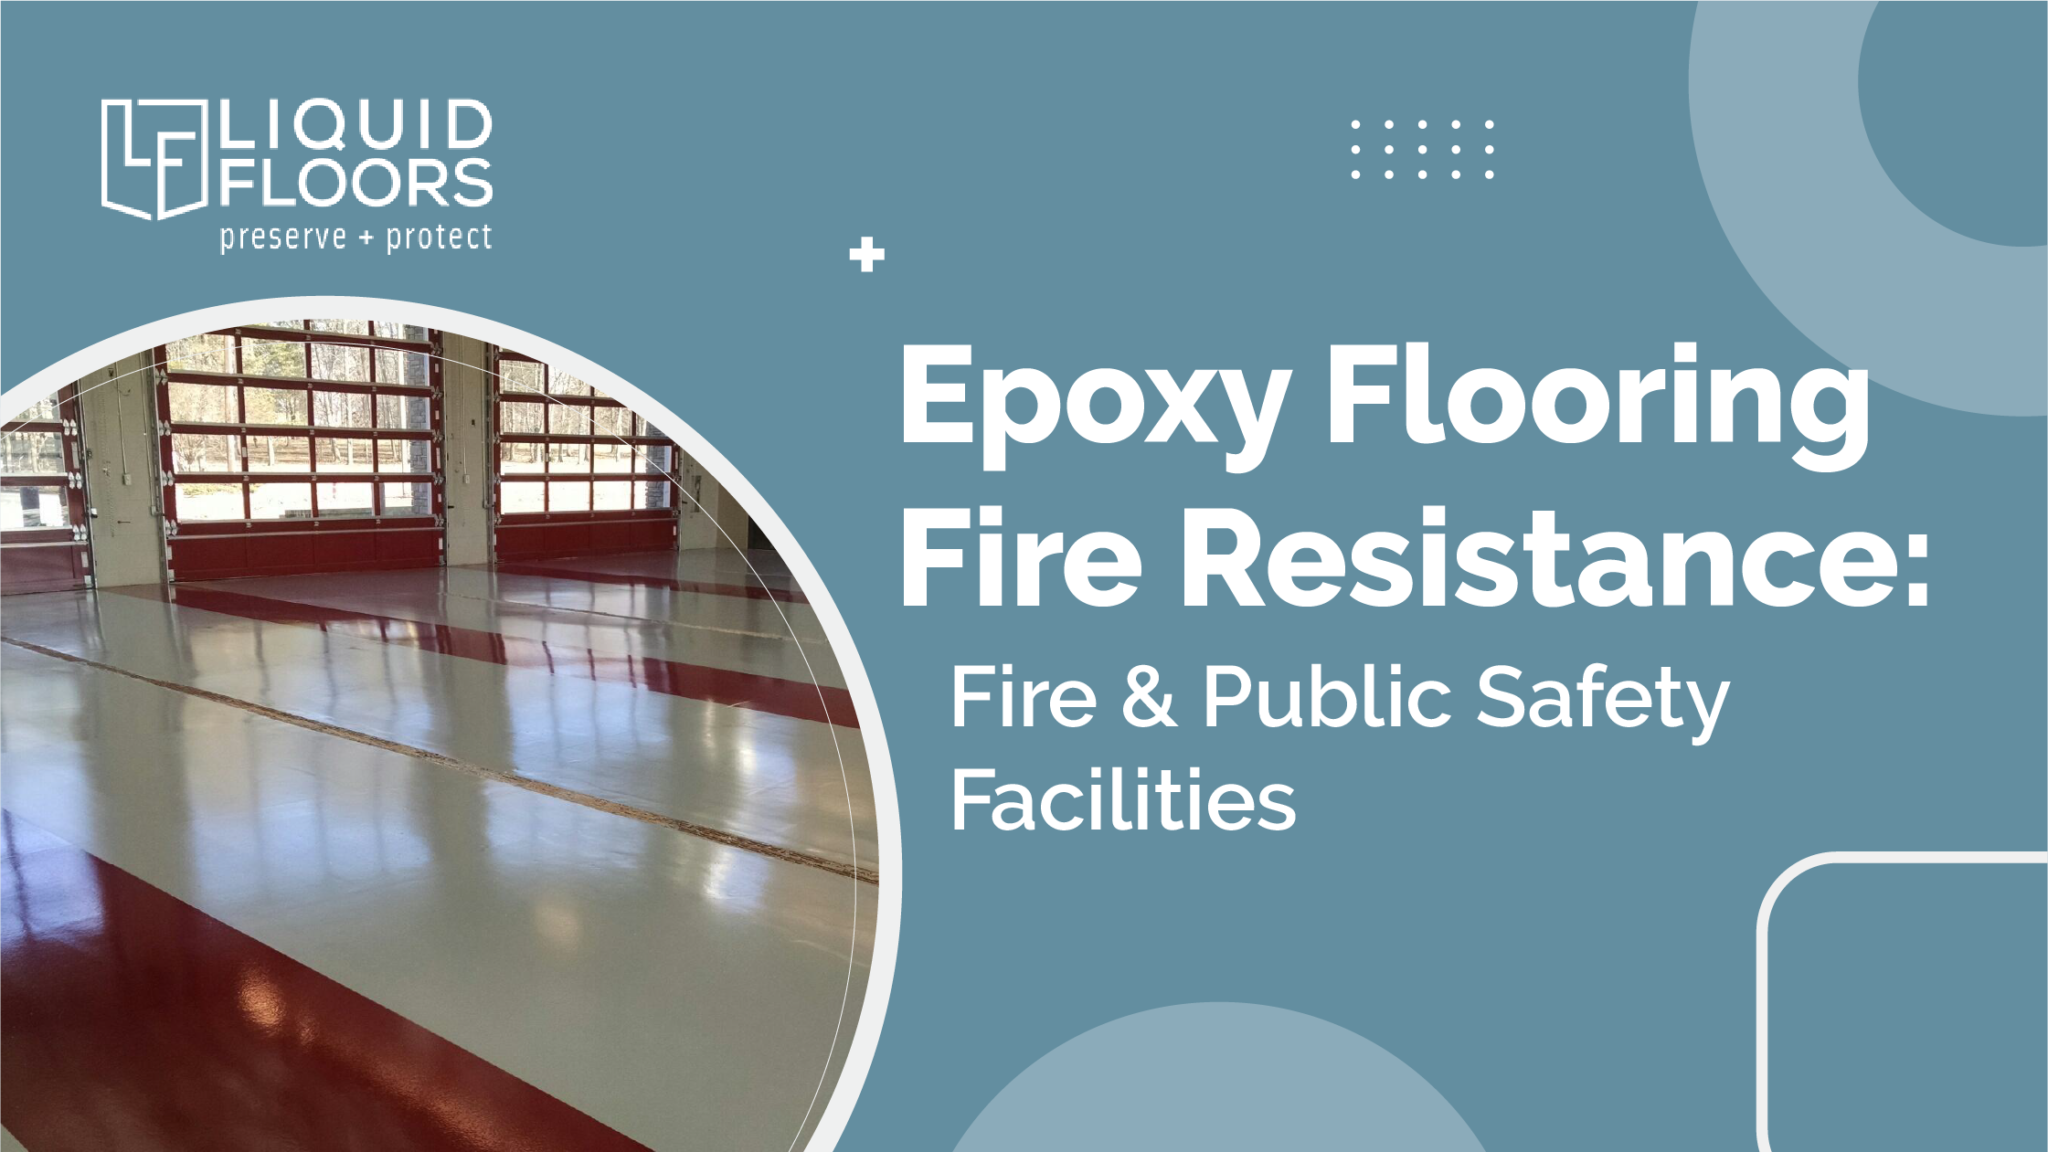 Epoxy flooring fire resistance fire and public safety buildings